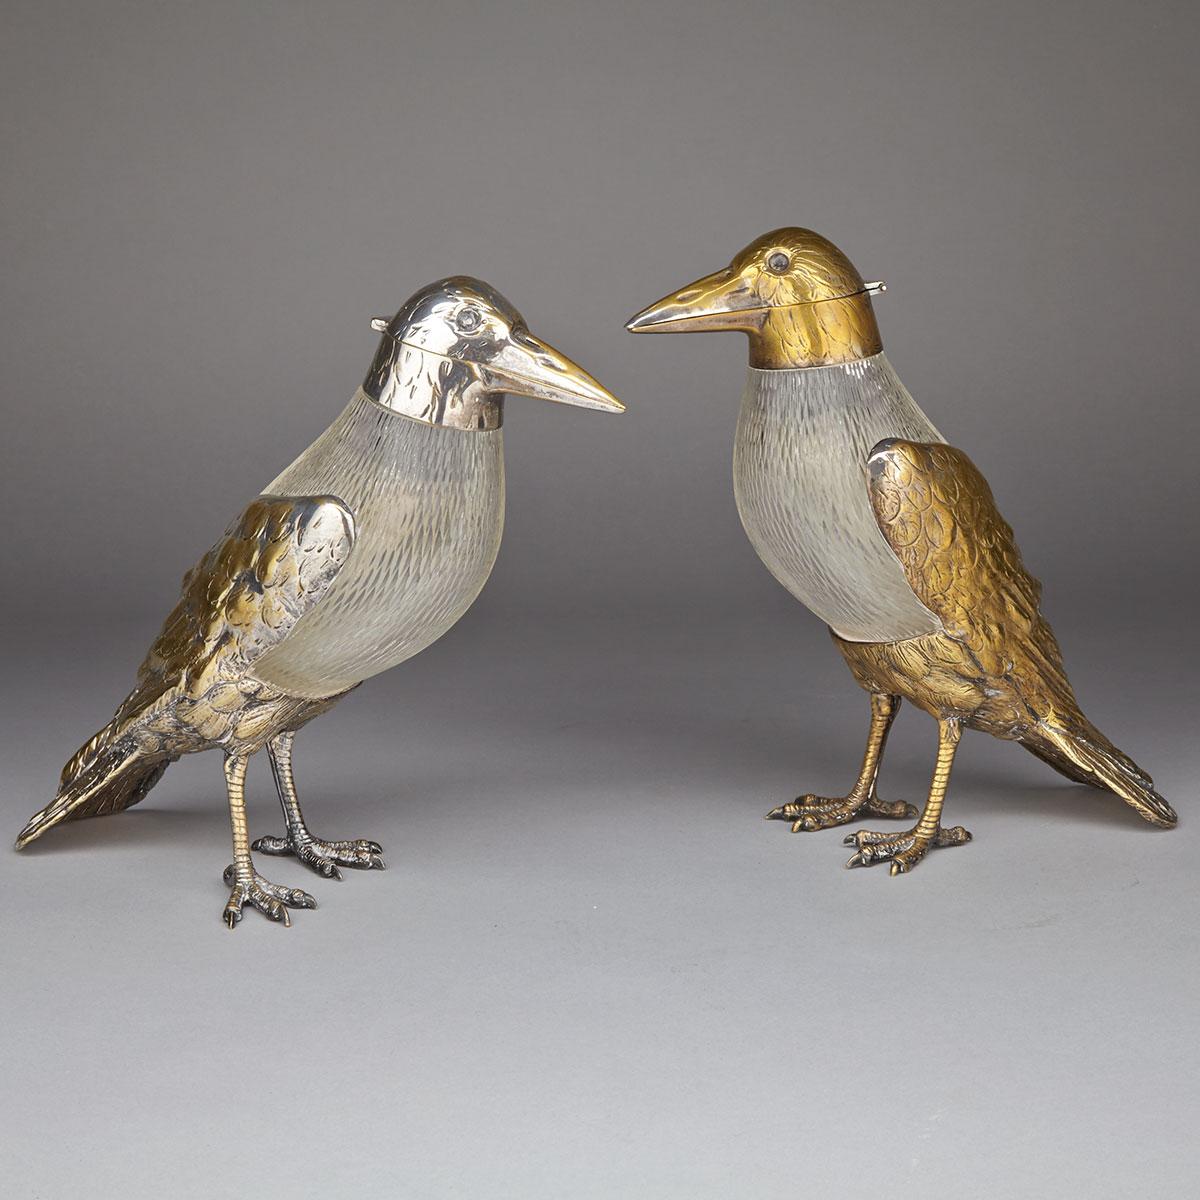 Pair of Austrian Silvered Brass and Cut Glass Bird Form Carafes, early 19th century